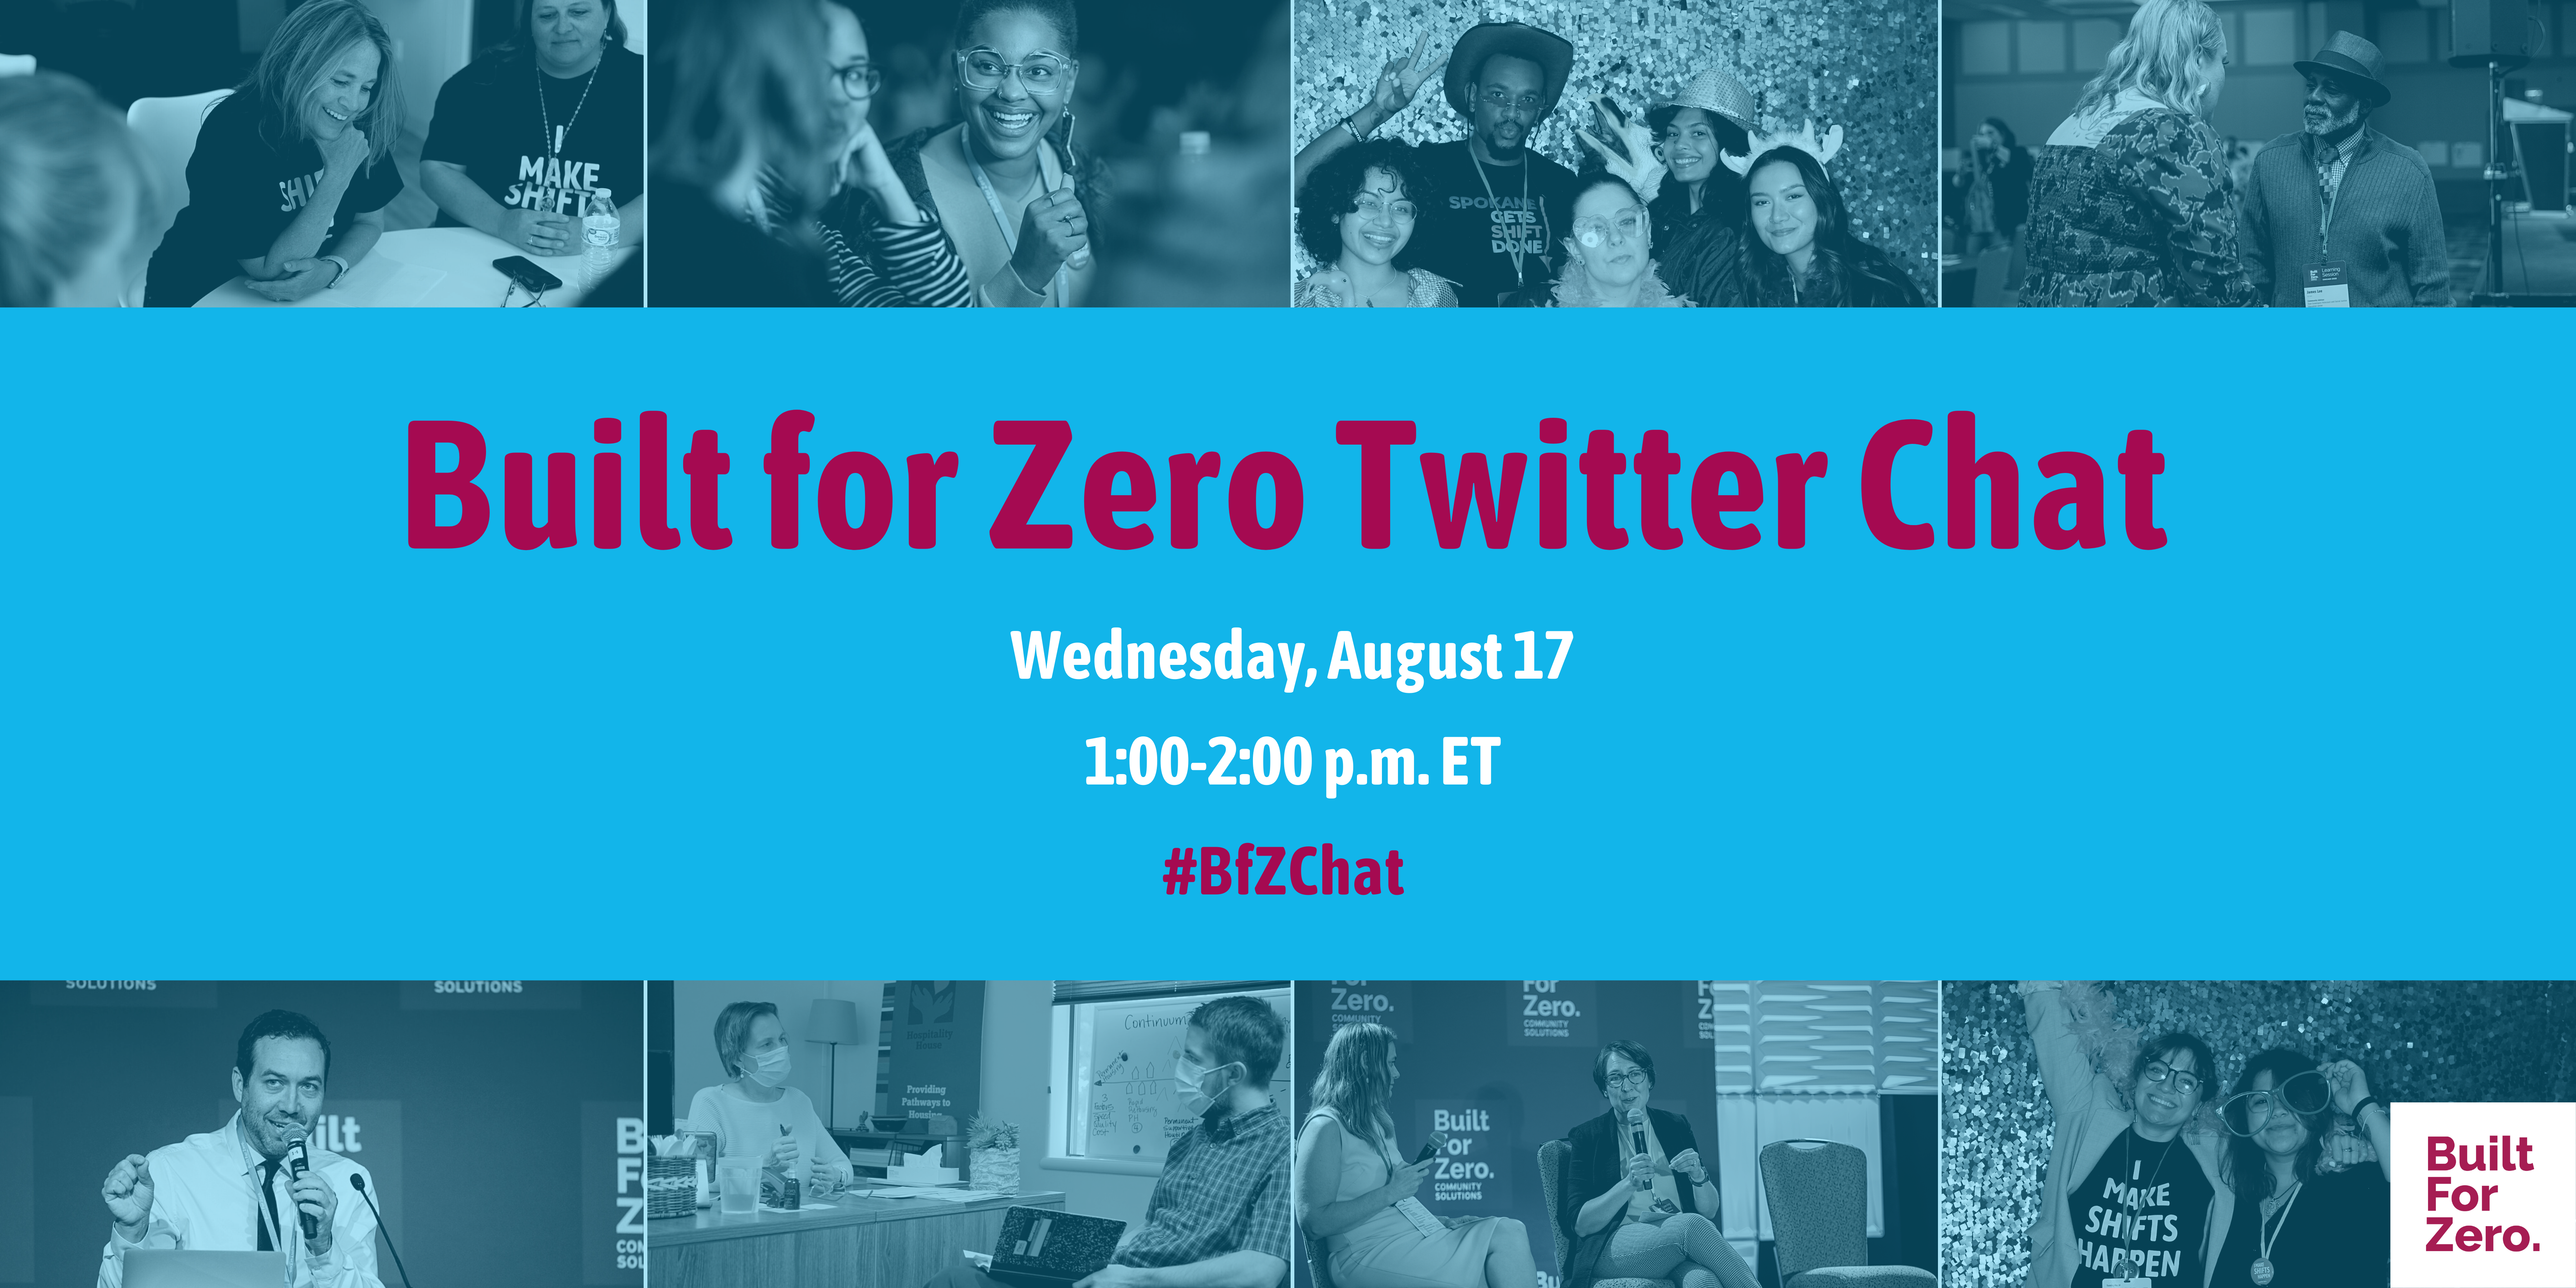 Built for Zero Twitter chat invitation showing faces of people in the Built for Zero movement.